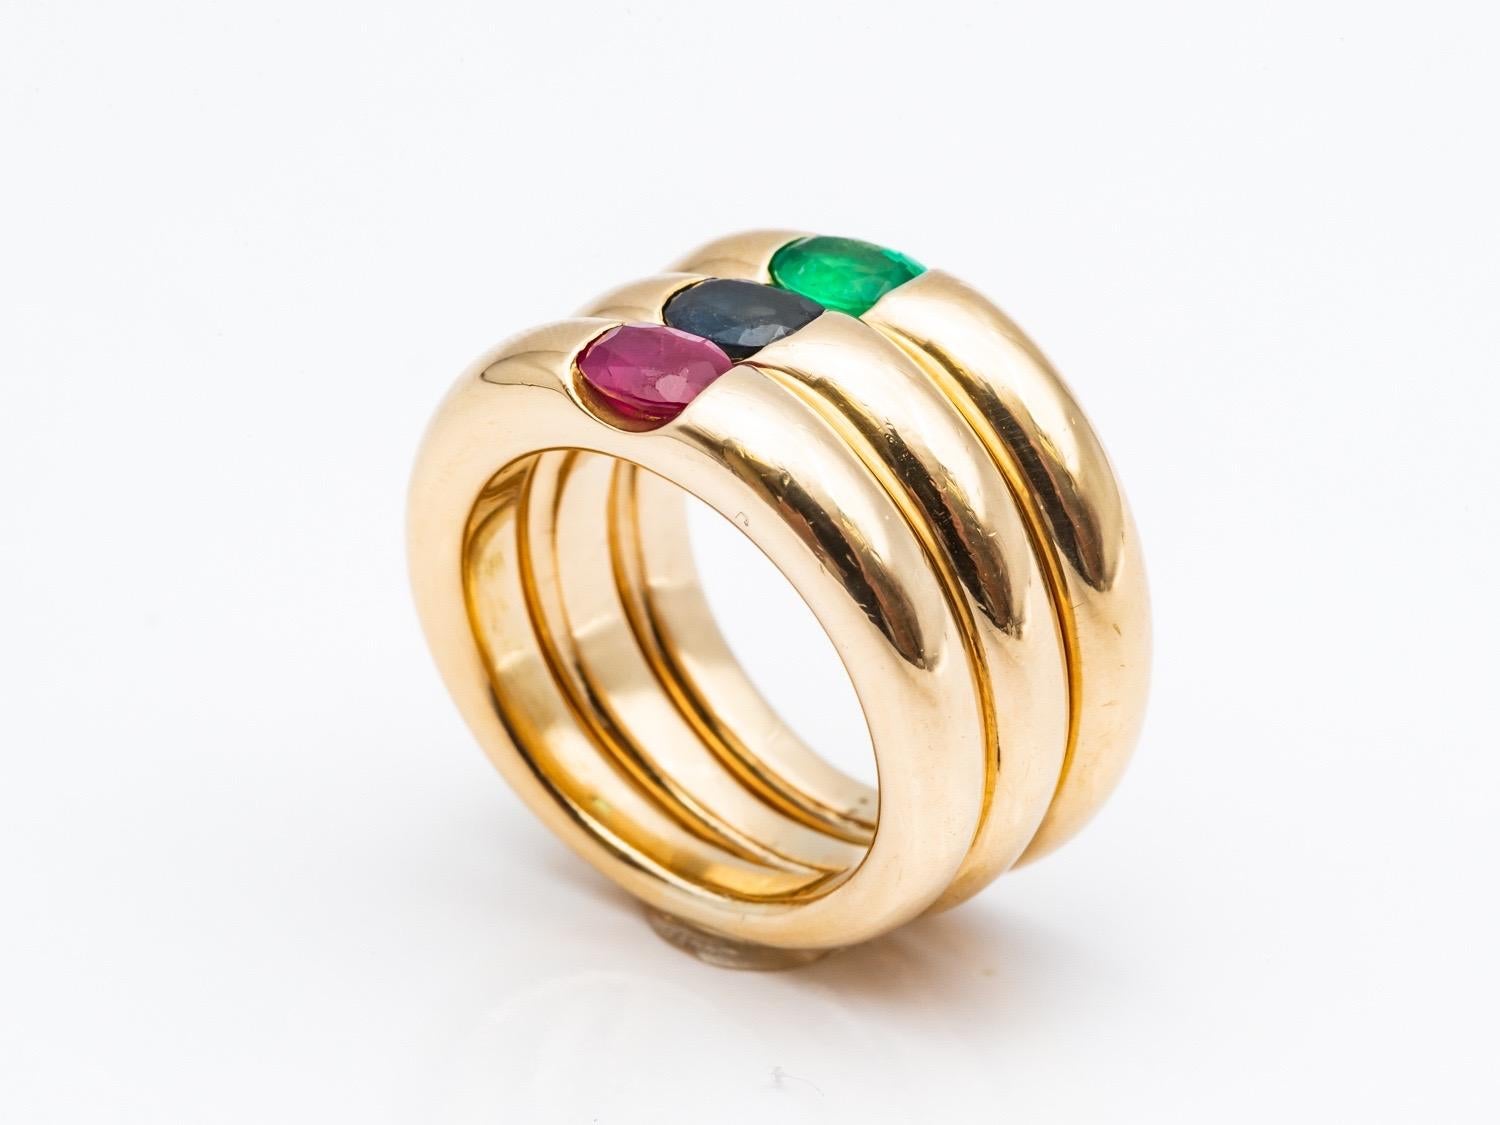 Three 18 Karat Gold Bangles Rings Set with an Emerald, a Sapphire, and a Ruby 2